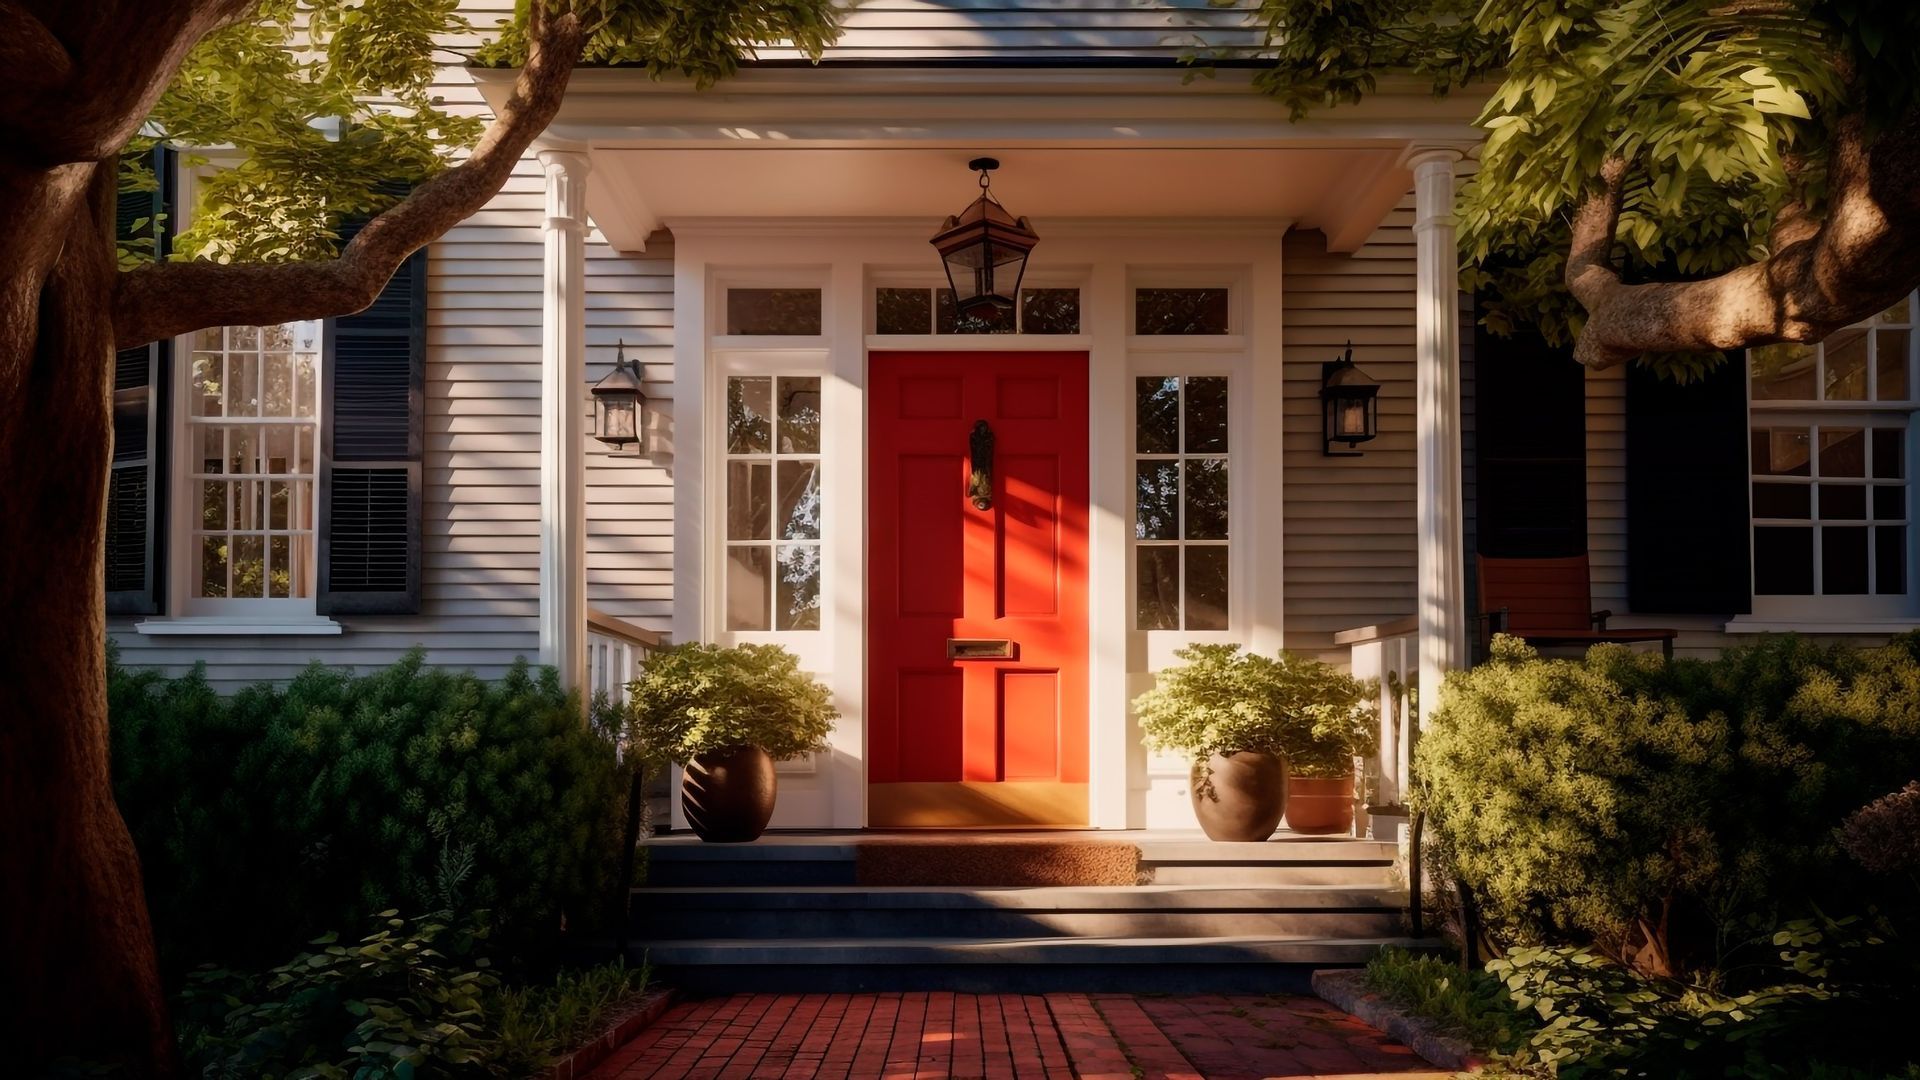 Three Basic Types of Entryways in Architecture